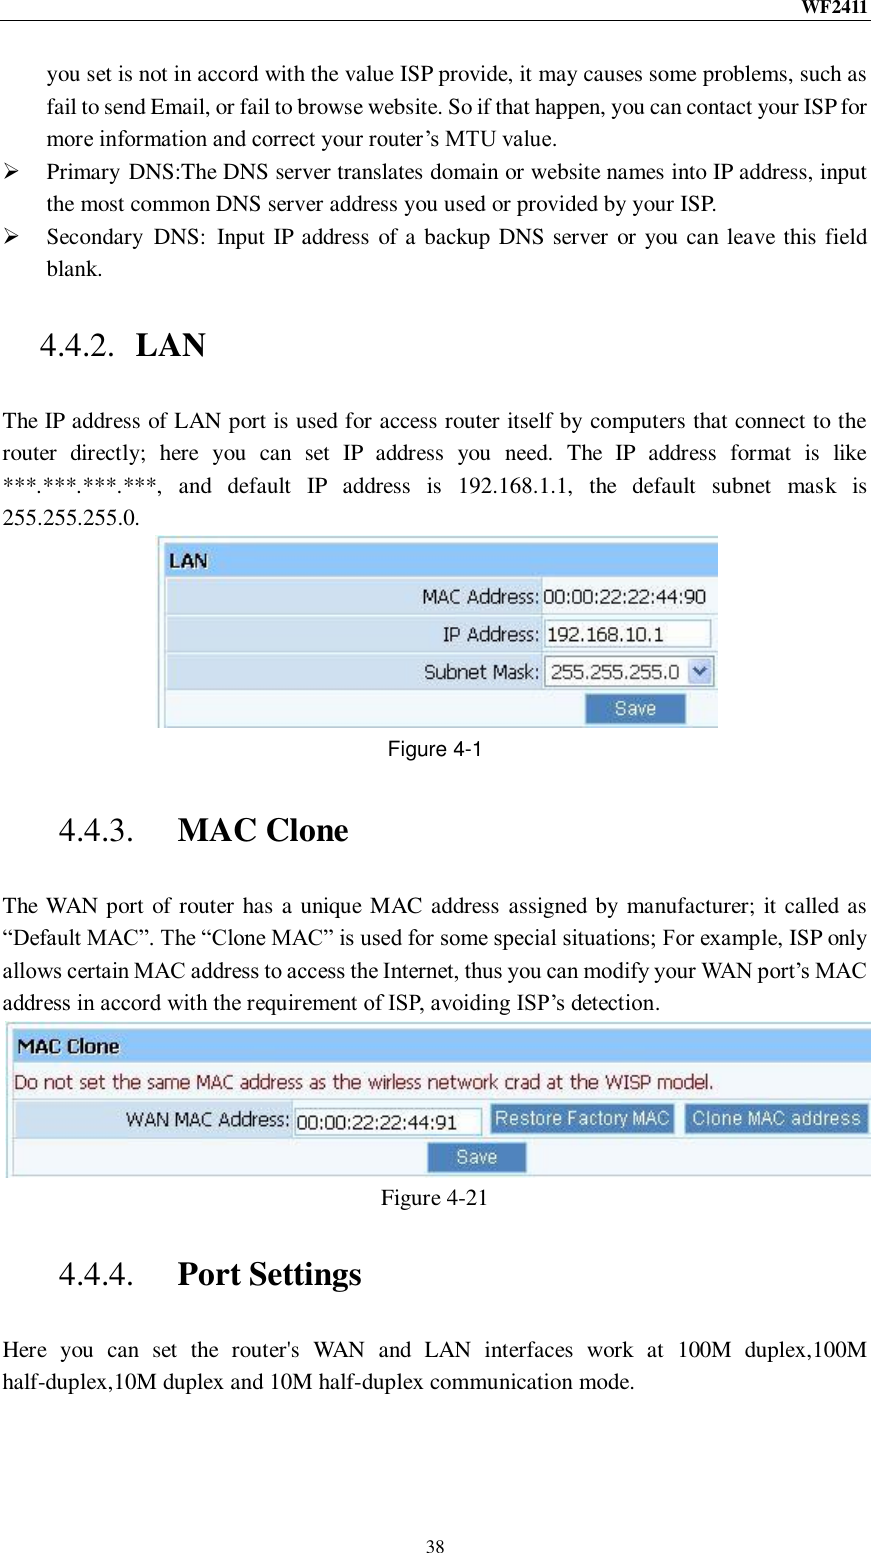 WF2411  38 you set is not in accord with the value ISP provide, it may causes some problems, such as fail to send Email, or fail to browse website. So if that happen, you can contact your ISP for more information and correct your router‟s MTU value.  Primary DNS:The DNS server translates domain or website names into IP address, input the most common DNS server address you used or provided by your ISP.  Secondary  DNS:  Input IP address of a backup DNS server or you can leave this field blank. 4.4.2. LAN The IP address of LAN port is used for access router itself by computers that connect to the router  directly;  here  you  can  set  IP  address  you  need.  The  IP  address  format  is  like ***.***.***.***,  and  default  IP  address  is  192.168.1.1,  the  default  subnet  mask  is 255.255.255.0.  Figure 4-1 4.4.3. MAC Clone The WAN port of router has a unique MAC address assigned by manufacturer; it called as “Default MAC”. The “Clone MAC” is used for some special situations; For example, ISP only allows certain MAC address to access the Internet, thus you can modify your WAN port‟s MAC address in accord with the requirement of ISP, avoiding ISP‟s detection.  Figure 4-21 4.4.4. Port Settings Here  you  can  set  the  router&apos;s  WAN  and  LAN  interfaces  work  at  100M  duplex,100M half-duplex,10M duplex and 10M half-duplex communication mode. 